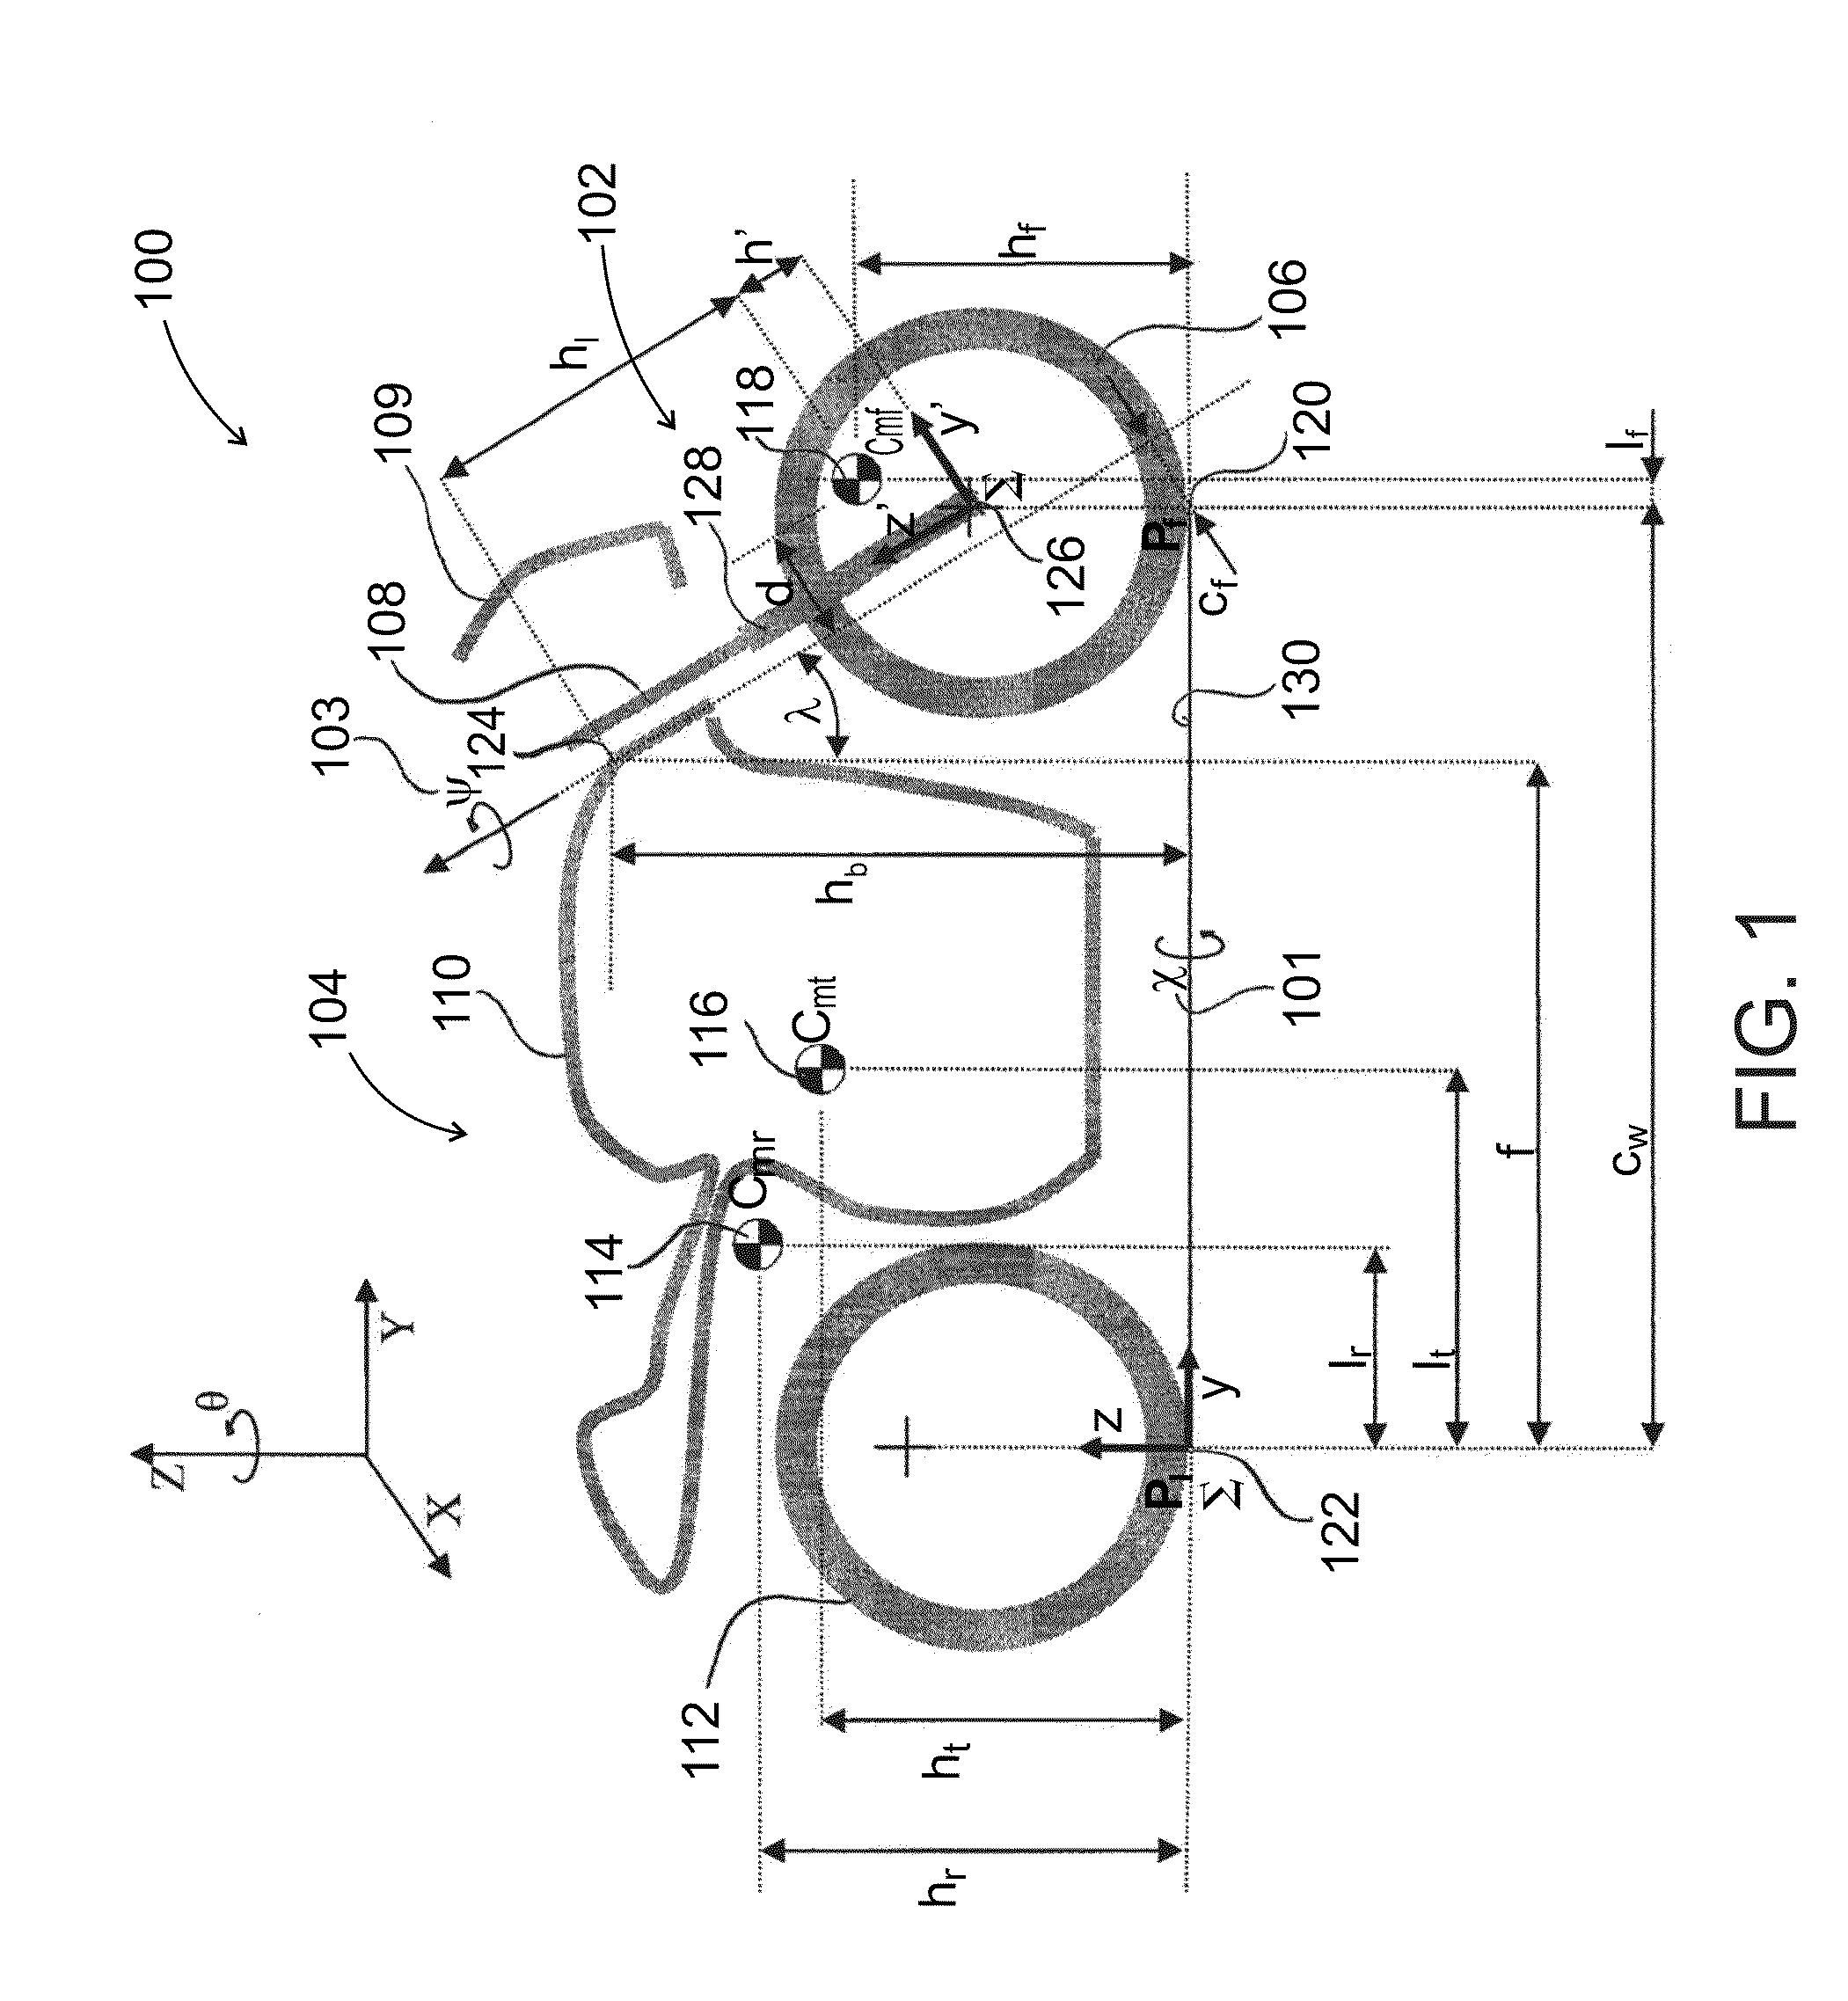 System and method for stabilizing a single-track vehicle